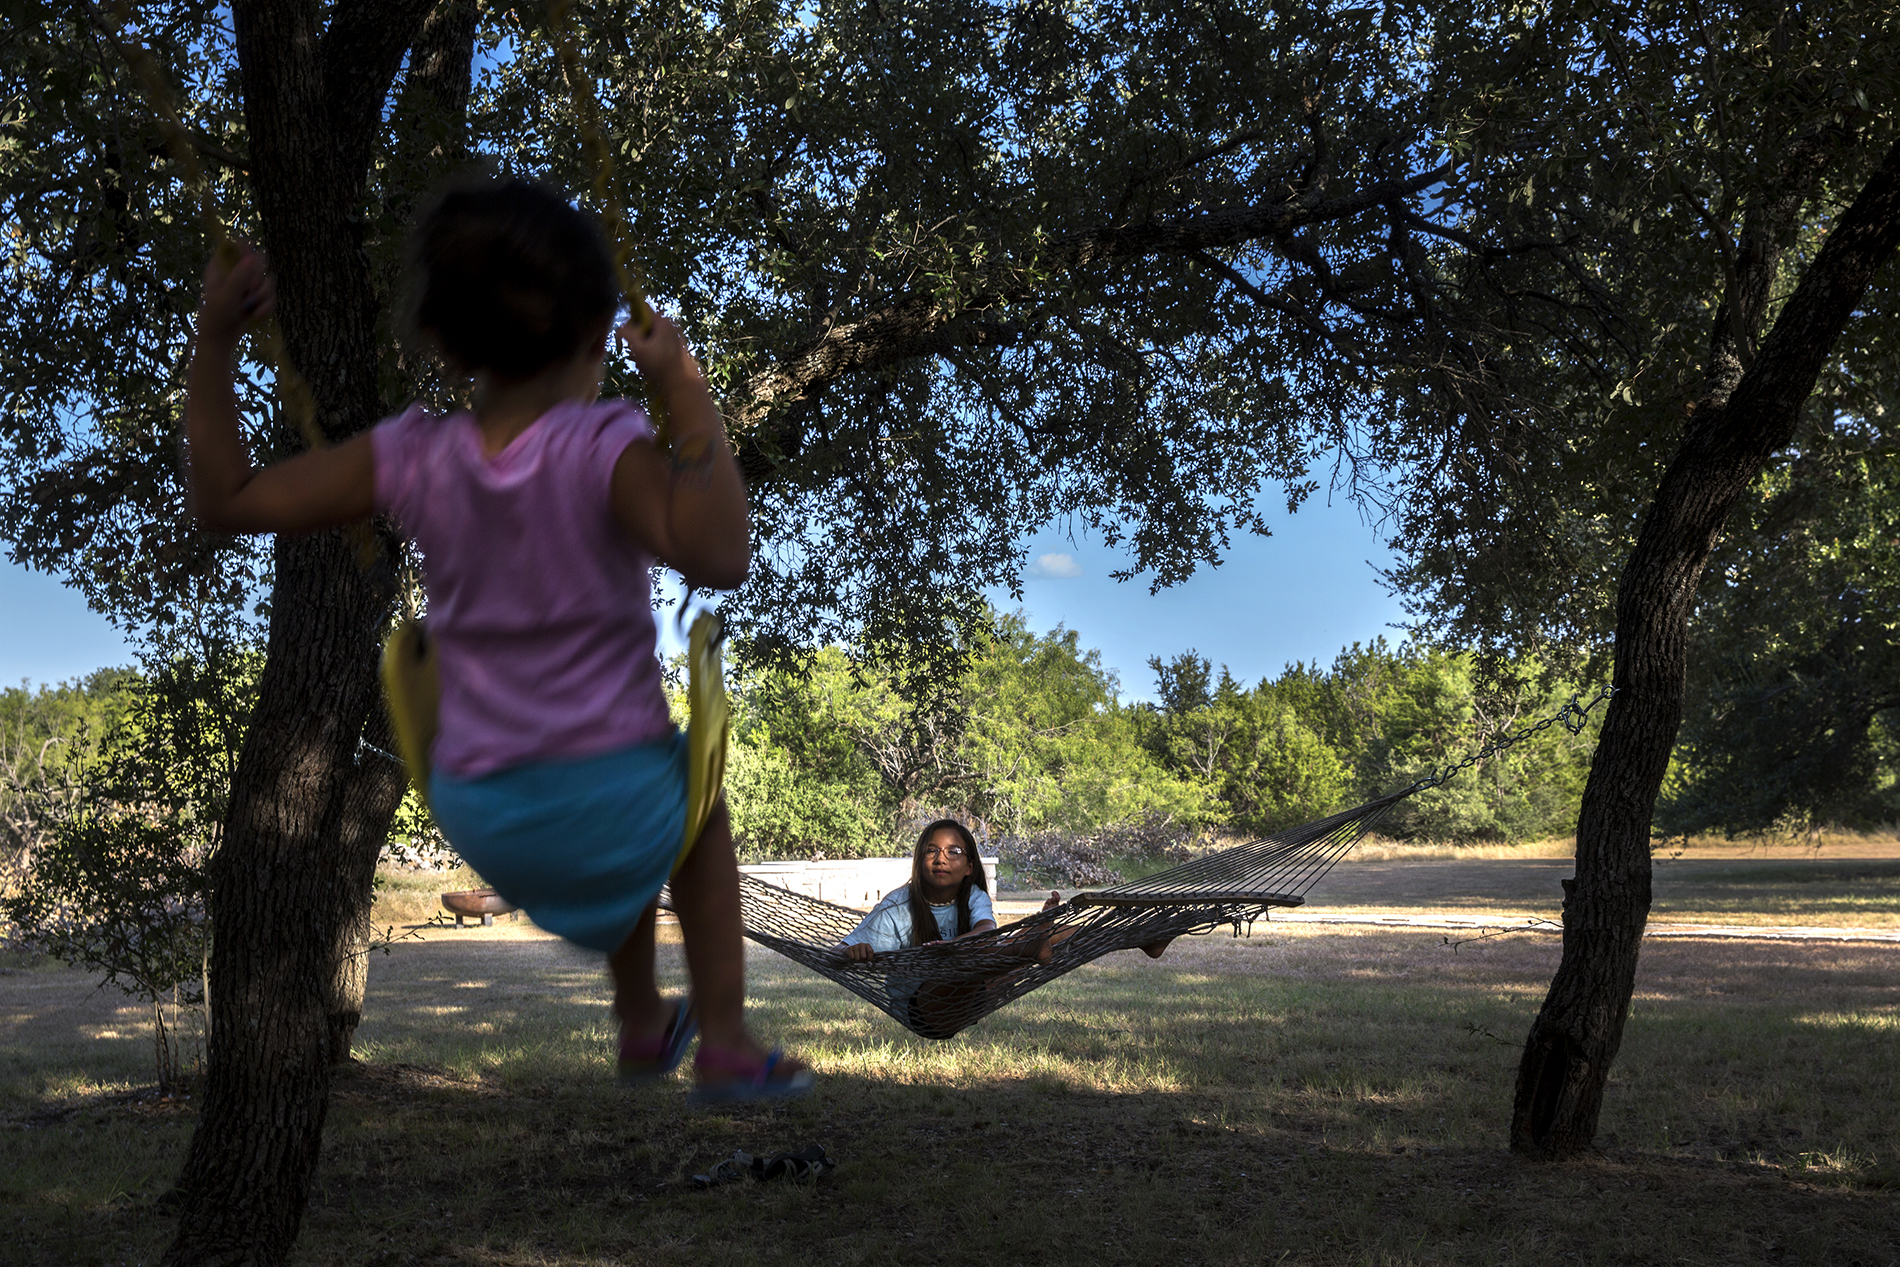 Hannah Welch, 10, watches her sister Haley, 4, on the swing outside their home in Double Horn.